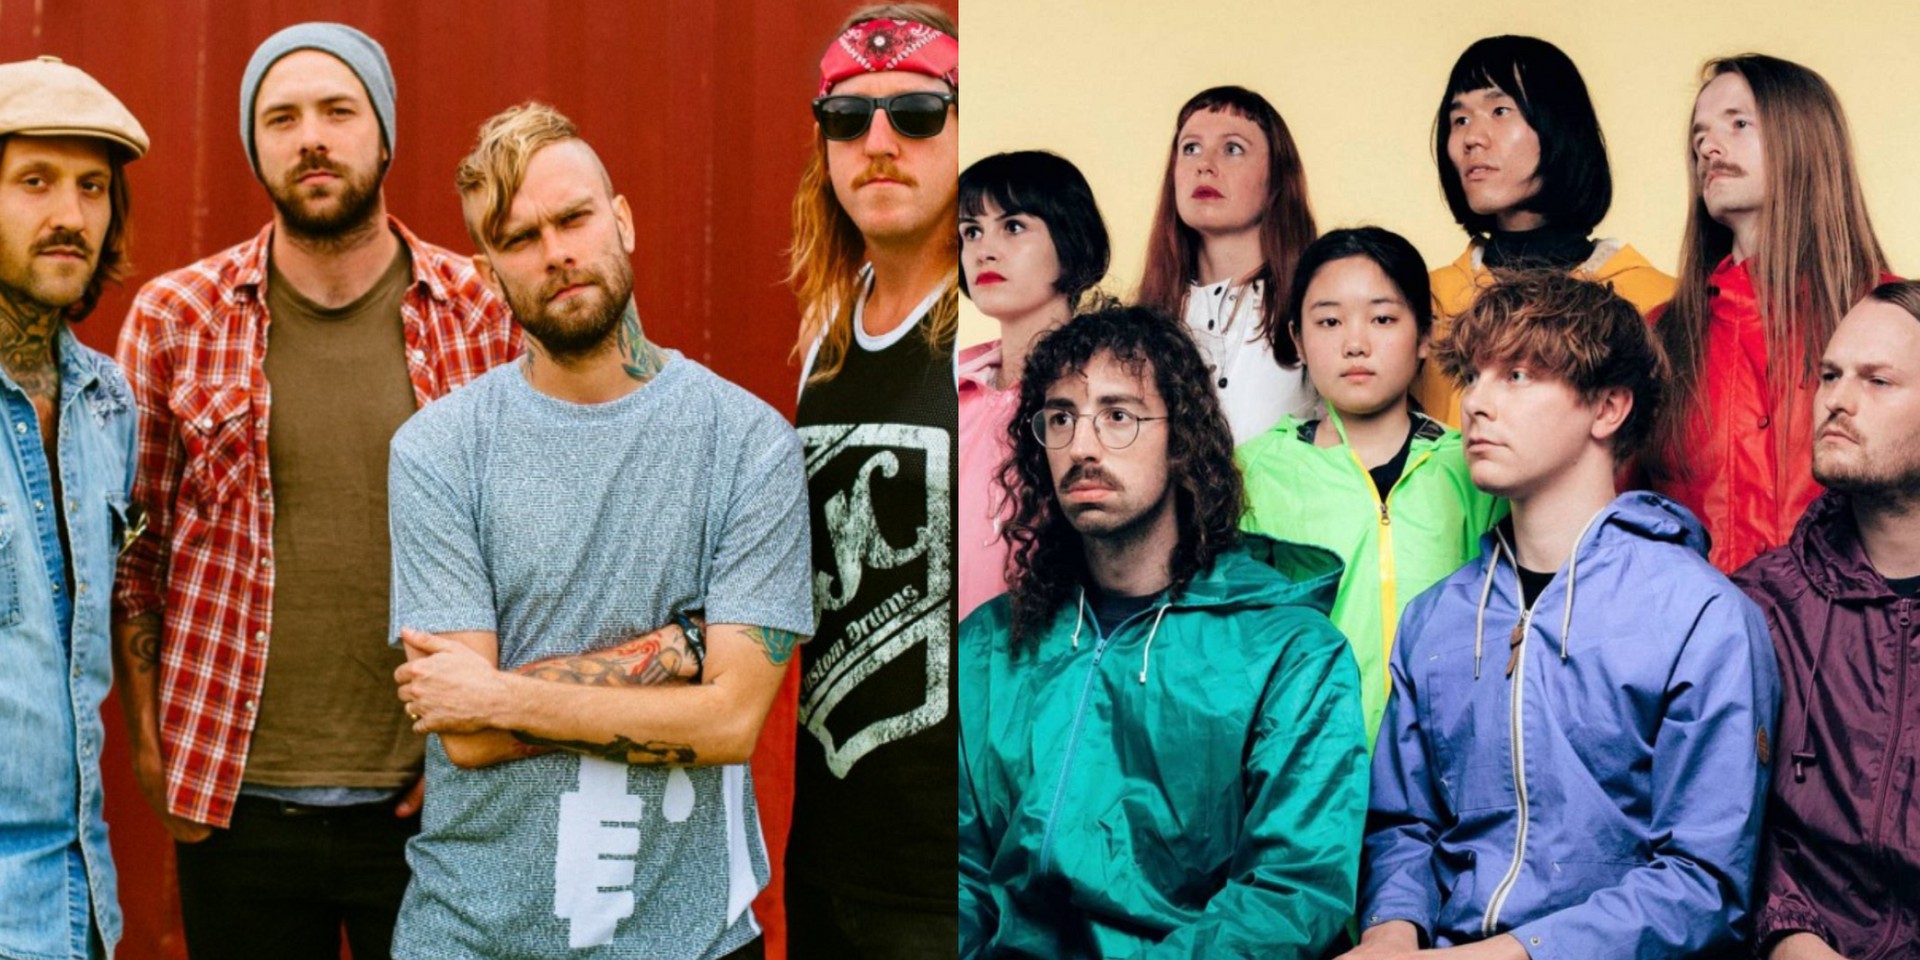 Hodgepodge Superfest 2019 announces Phase 2 line-up – The Used, Superorganism and more confirmed